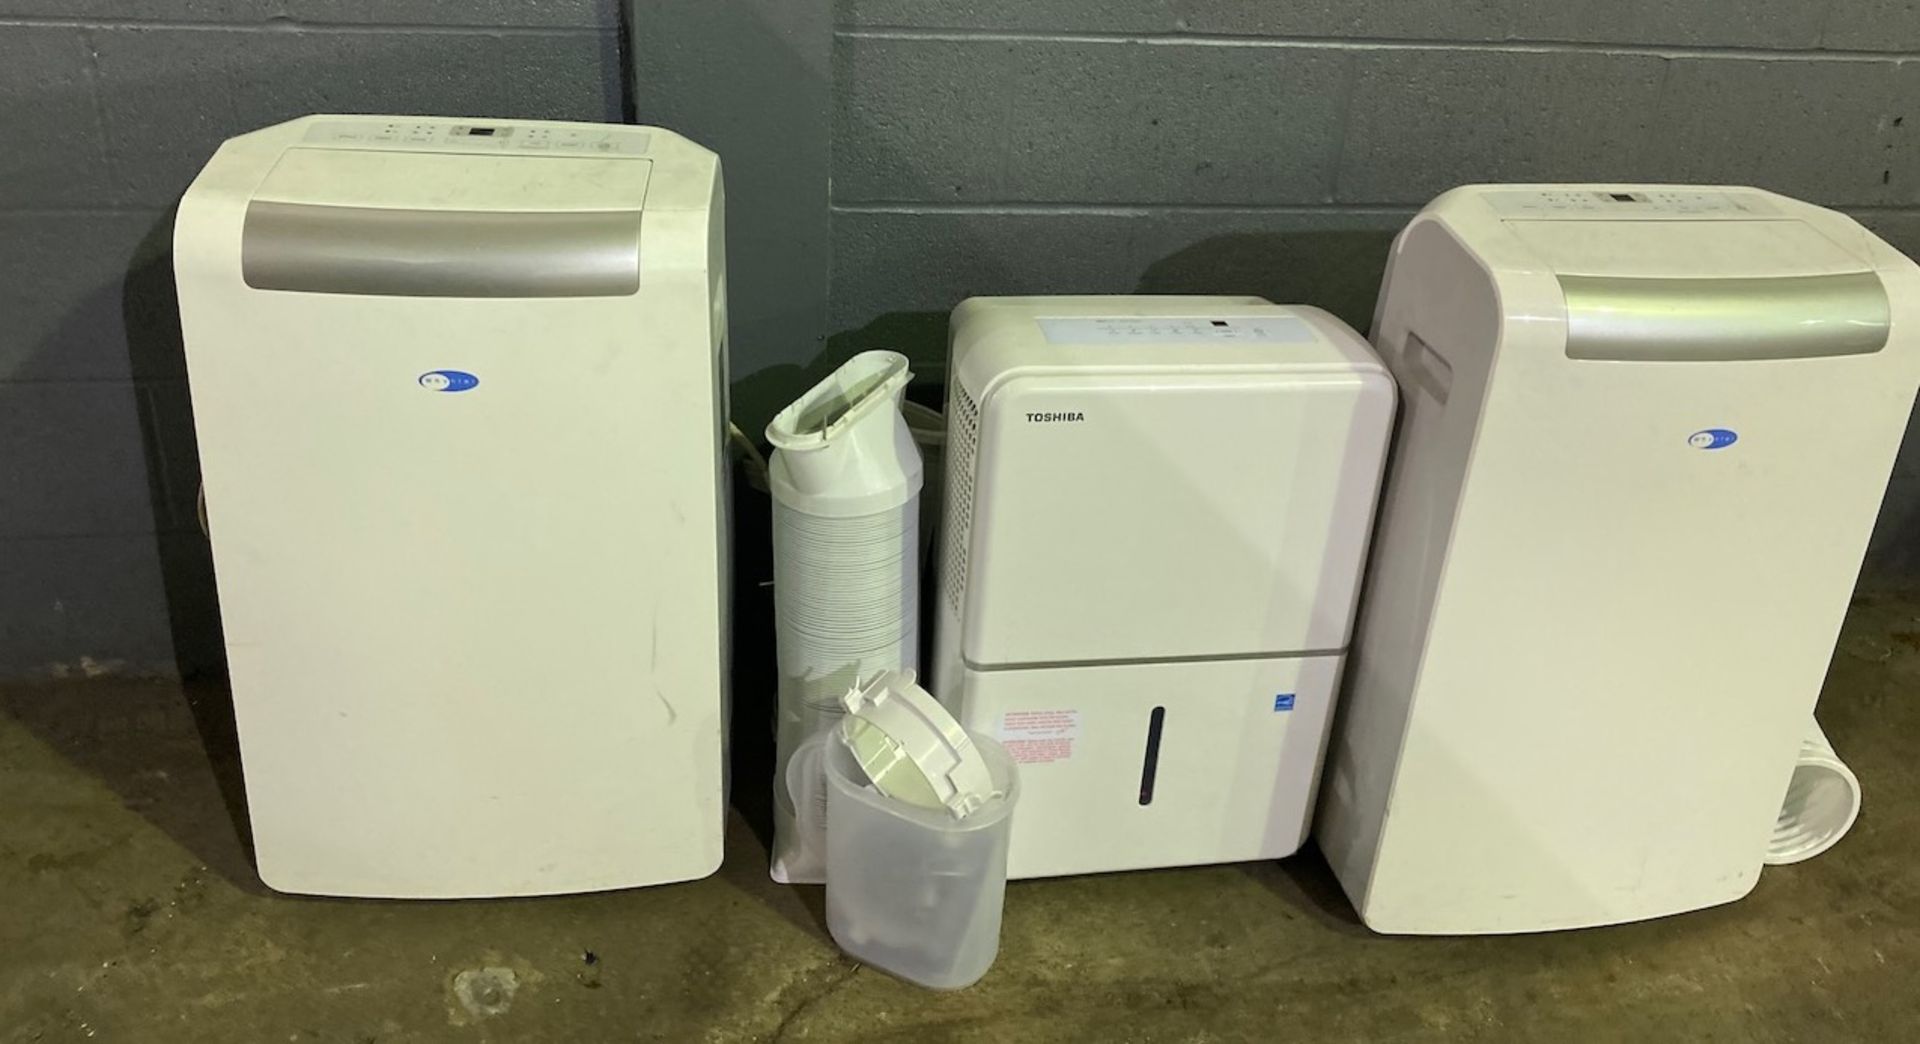 Three Portable Air Conditioners